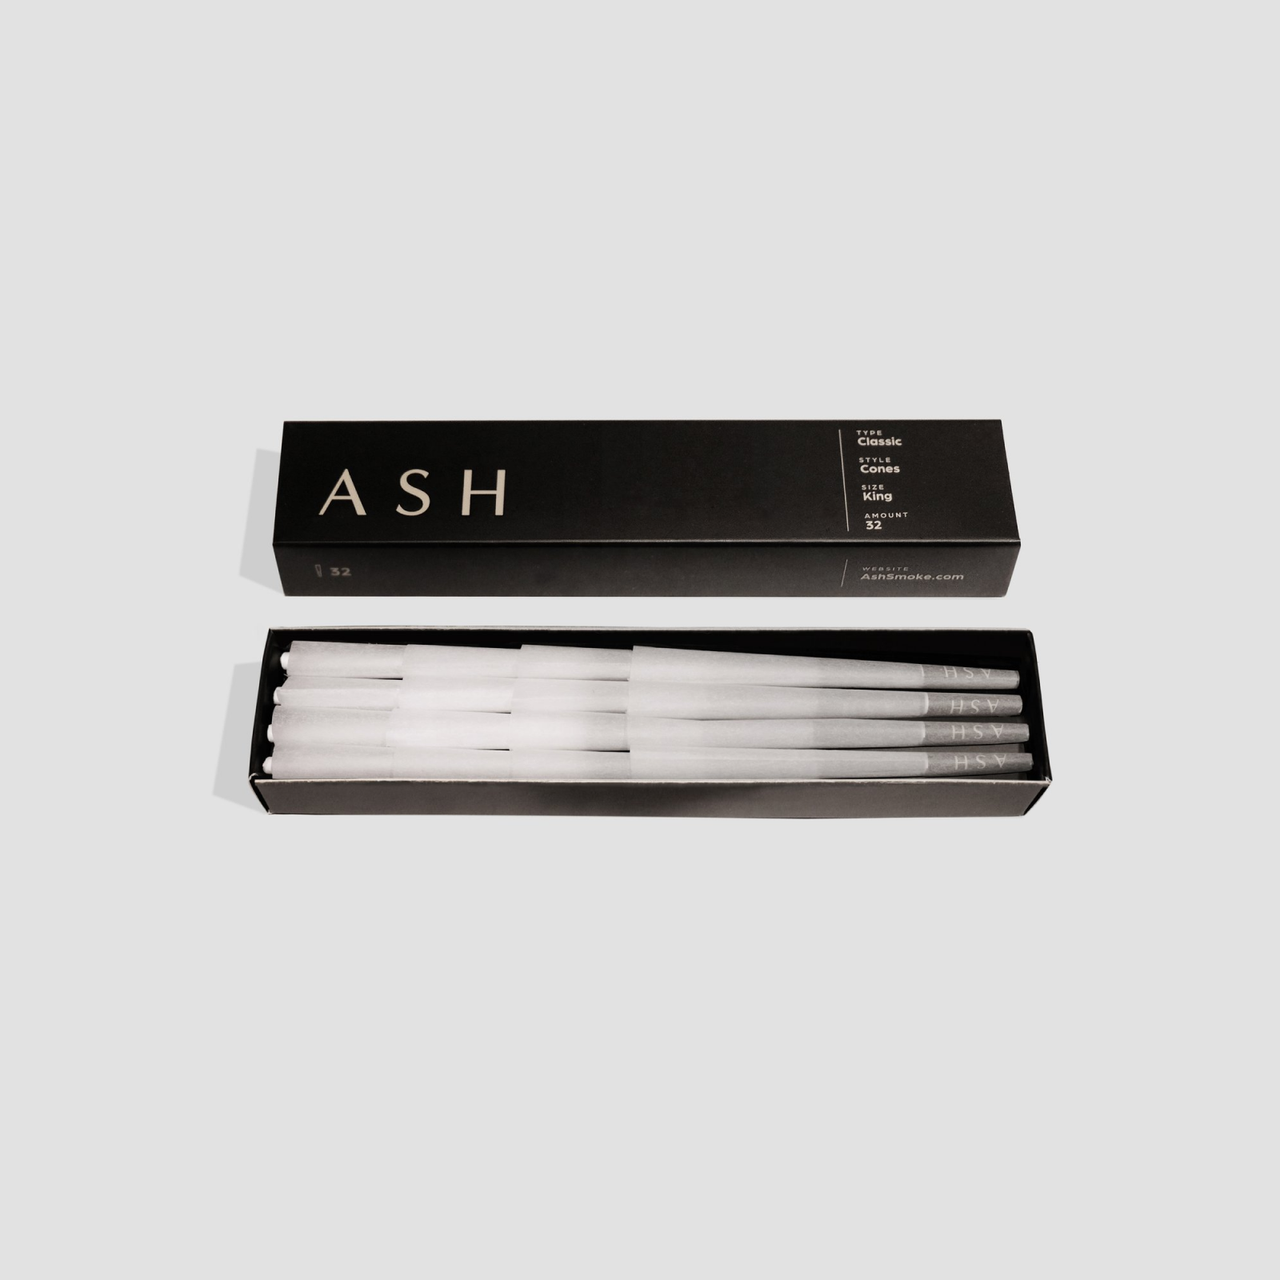 ASH Pre-Rolled Cones | Classic | 32 count